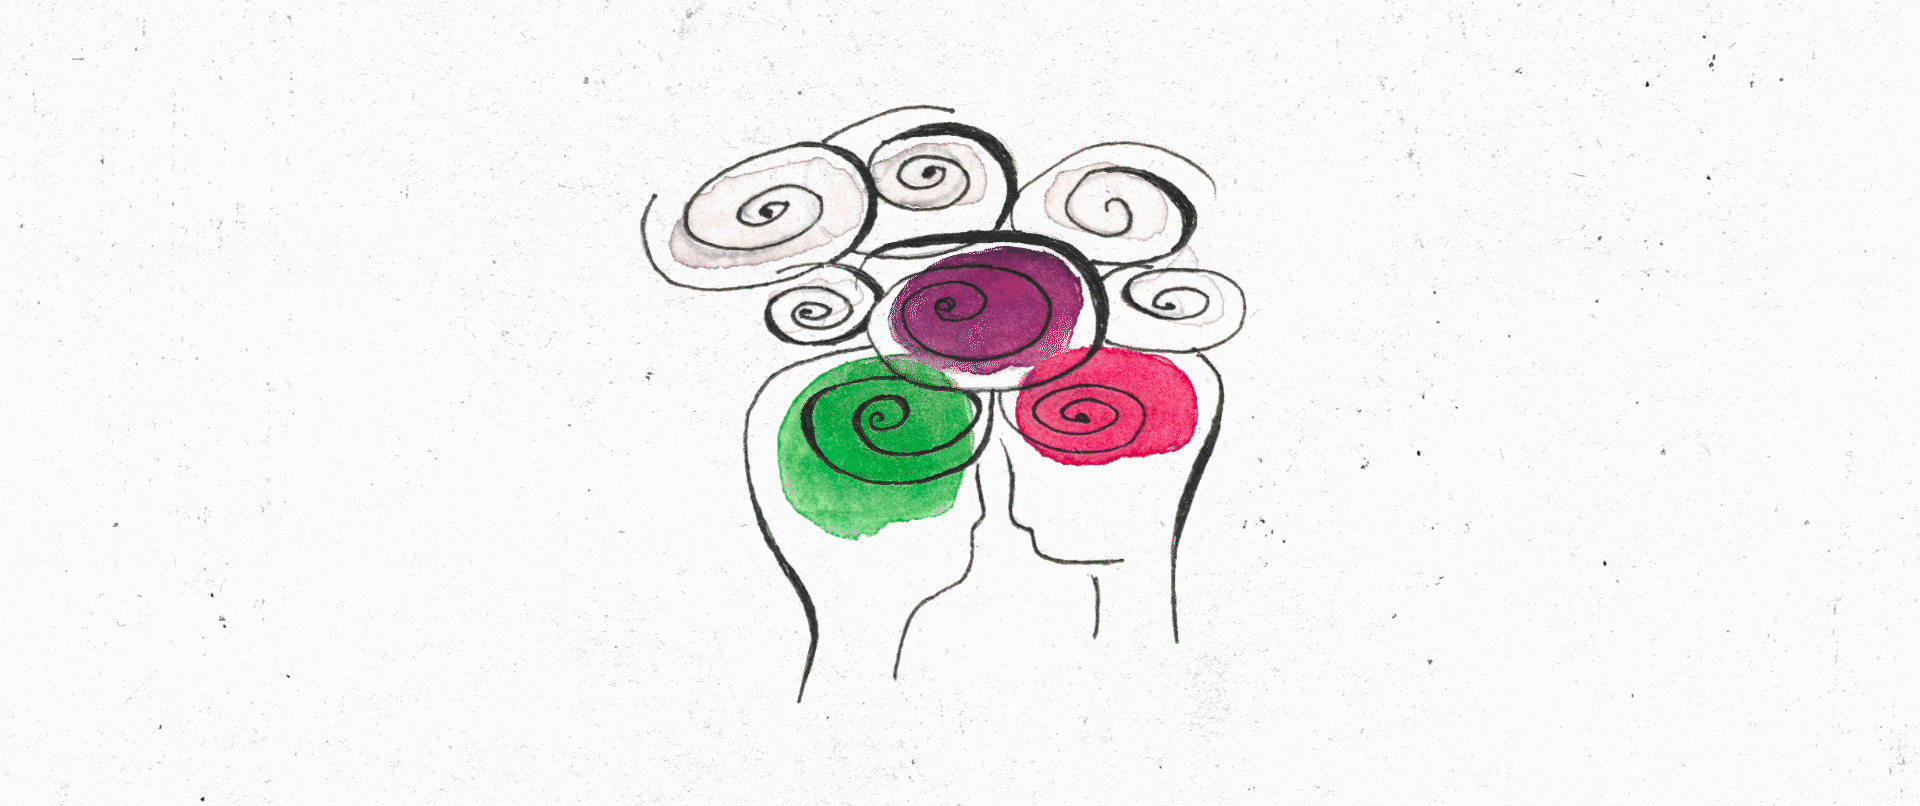 Art showing two human heads with colored brains